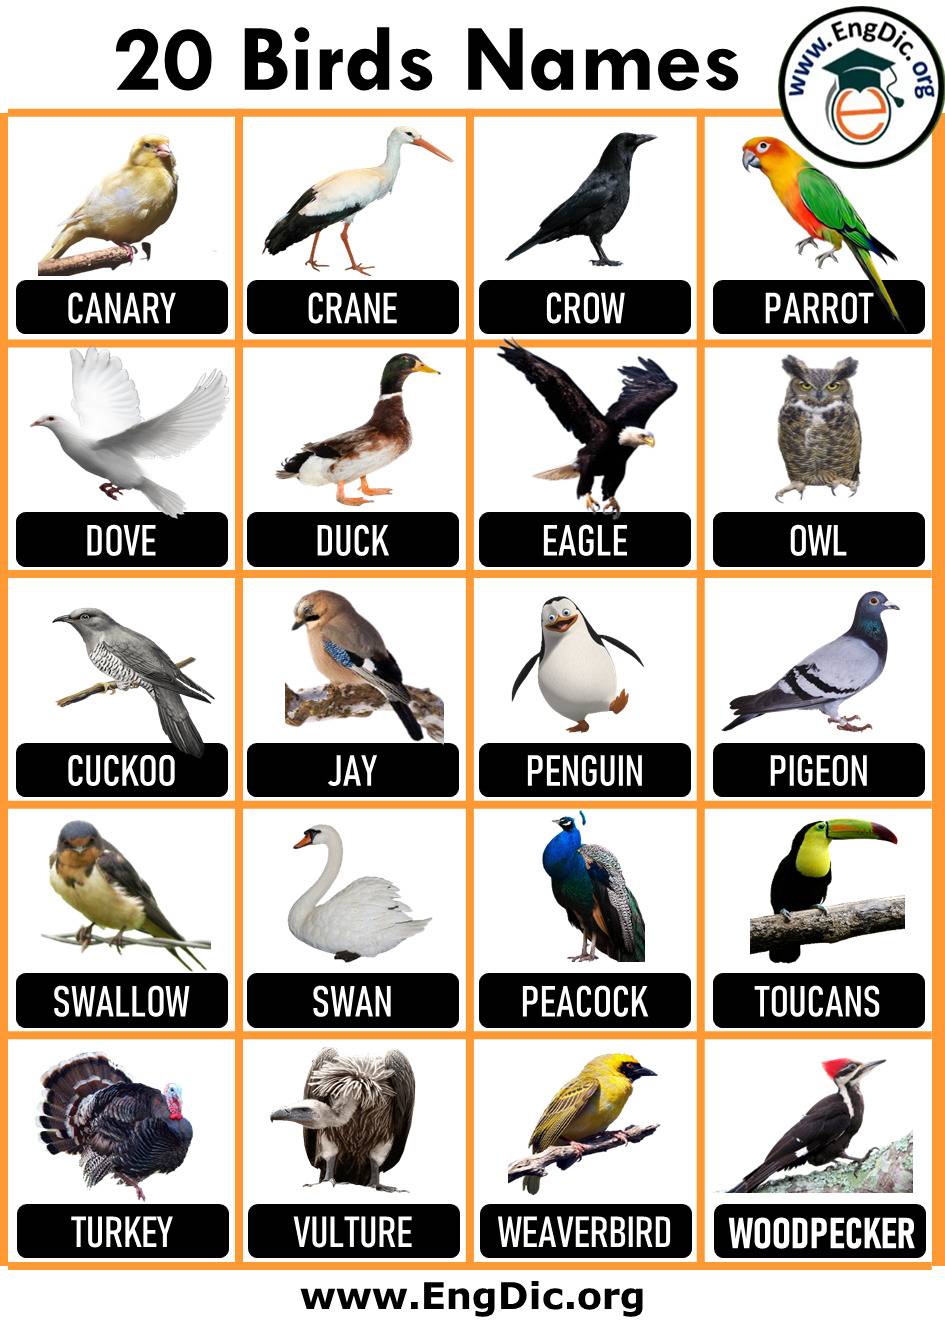 20 Birds Name, Birds Name List with Pictures PDF